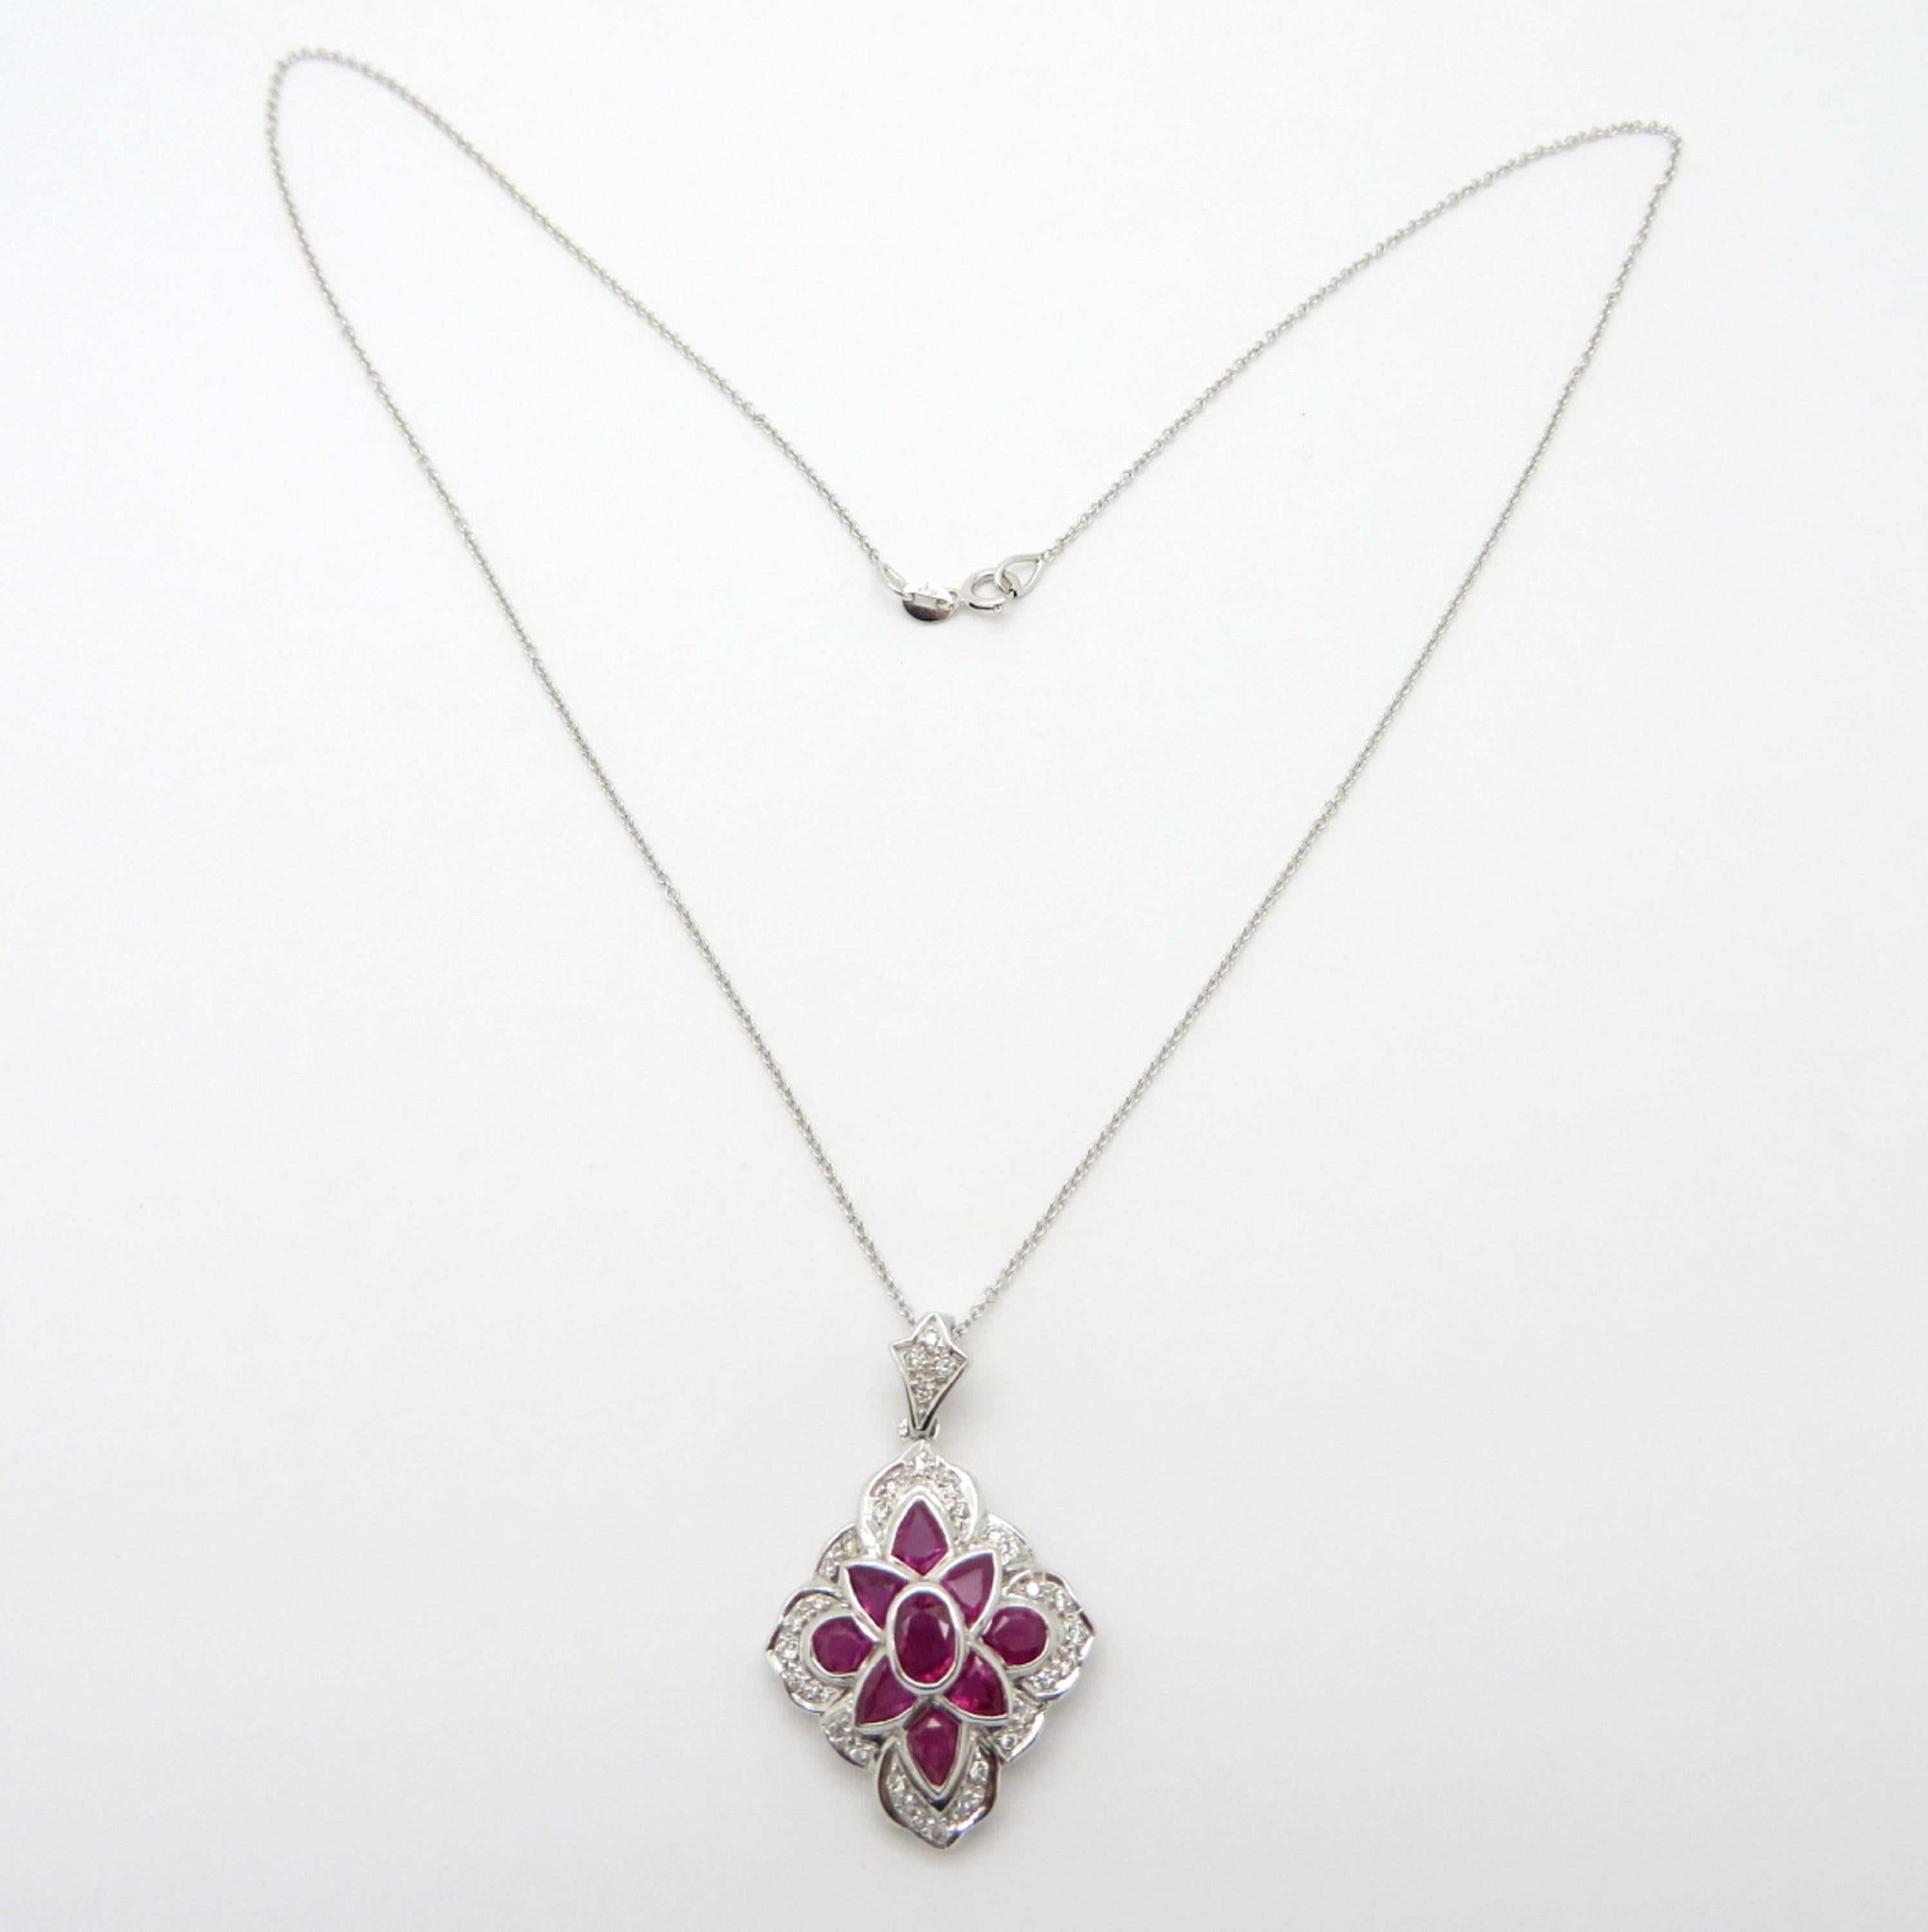 For sale is a beautiful Ruby and Diamond Pendant crafted out of 14K White Gold!
Showcasing 9 fine quality natural Rubies, with various measurements, weighing 2.00 carats.
Accented by 28 Round Brilliant Cut bead set diamonds, weighing 0.15 carats,